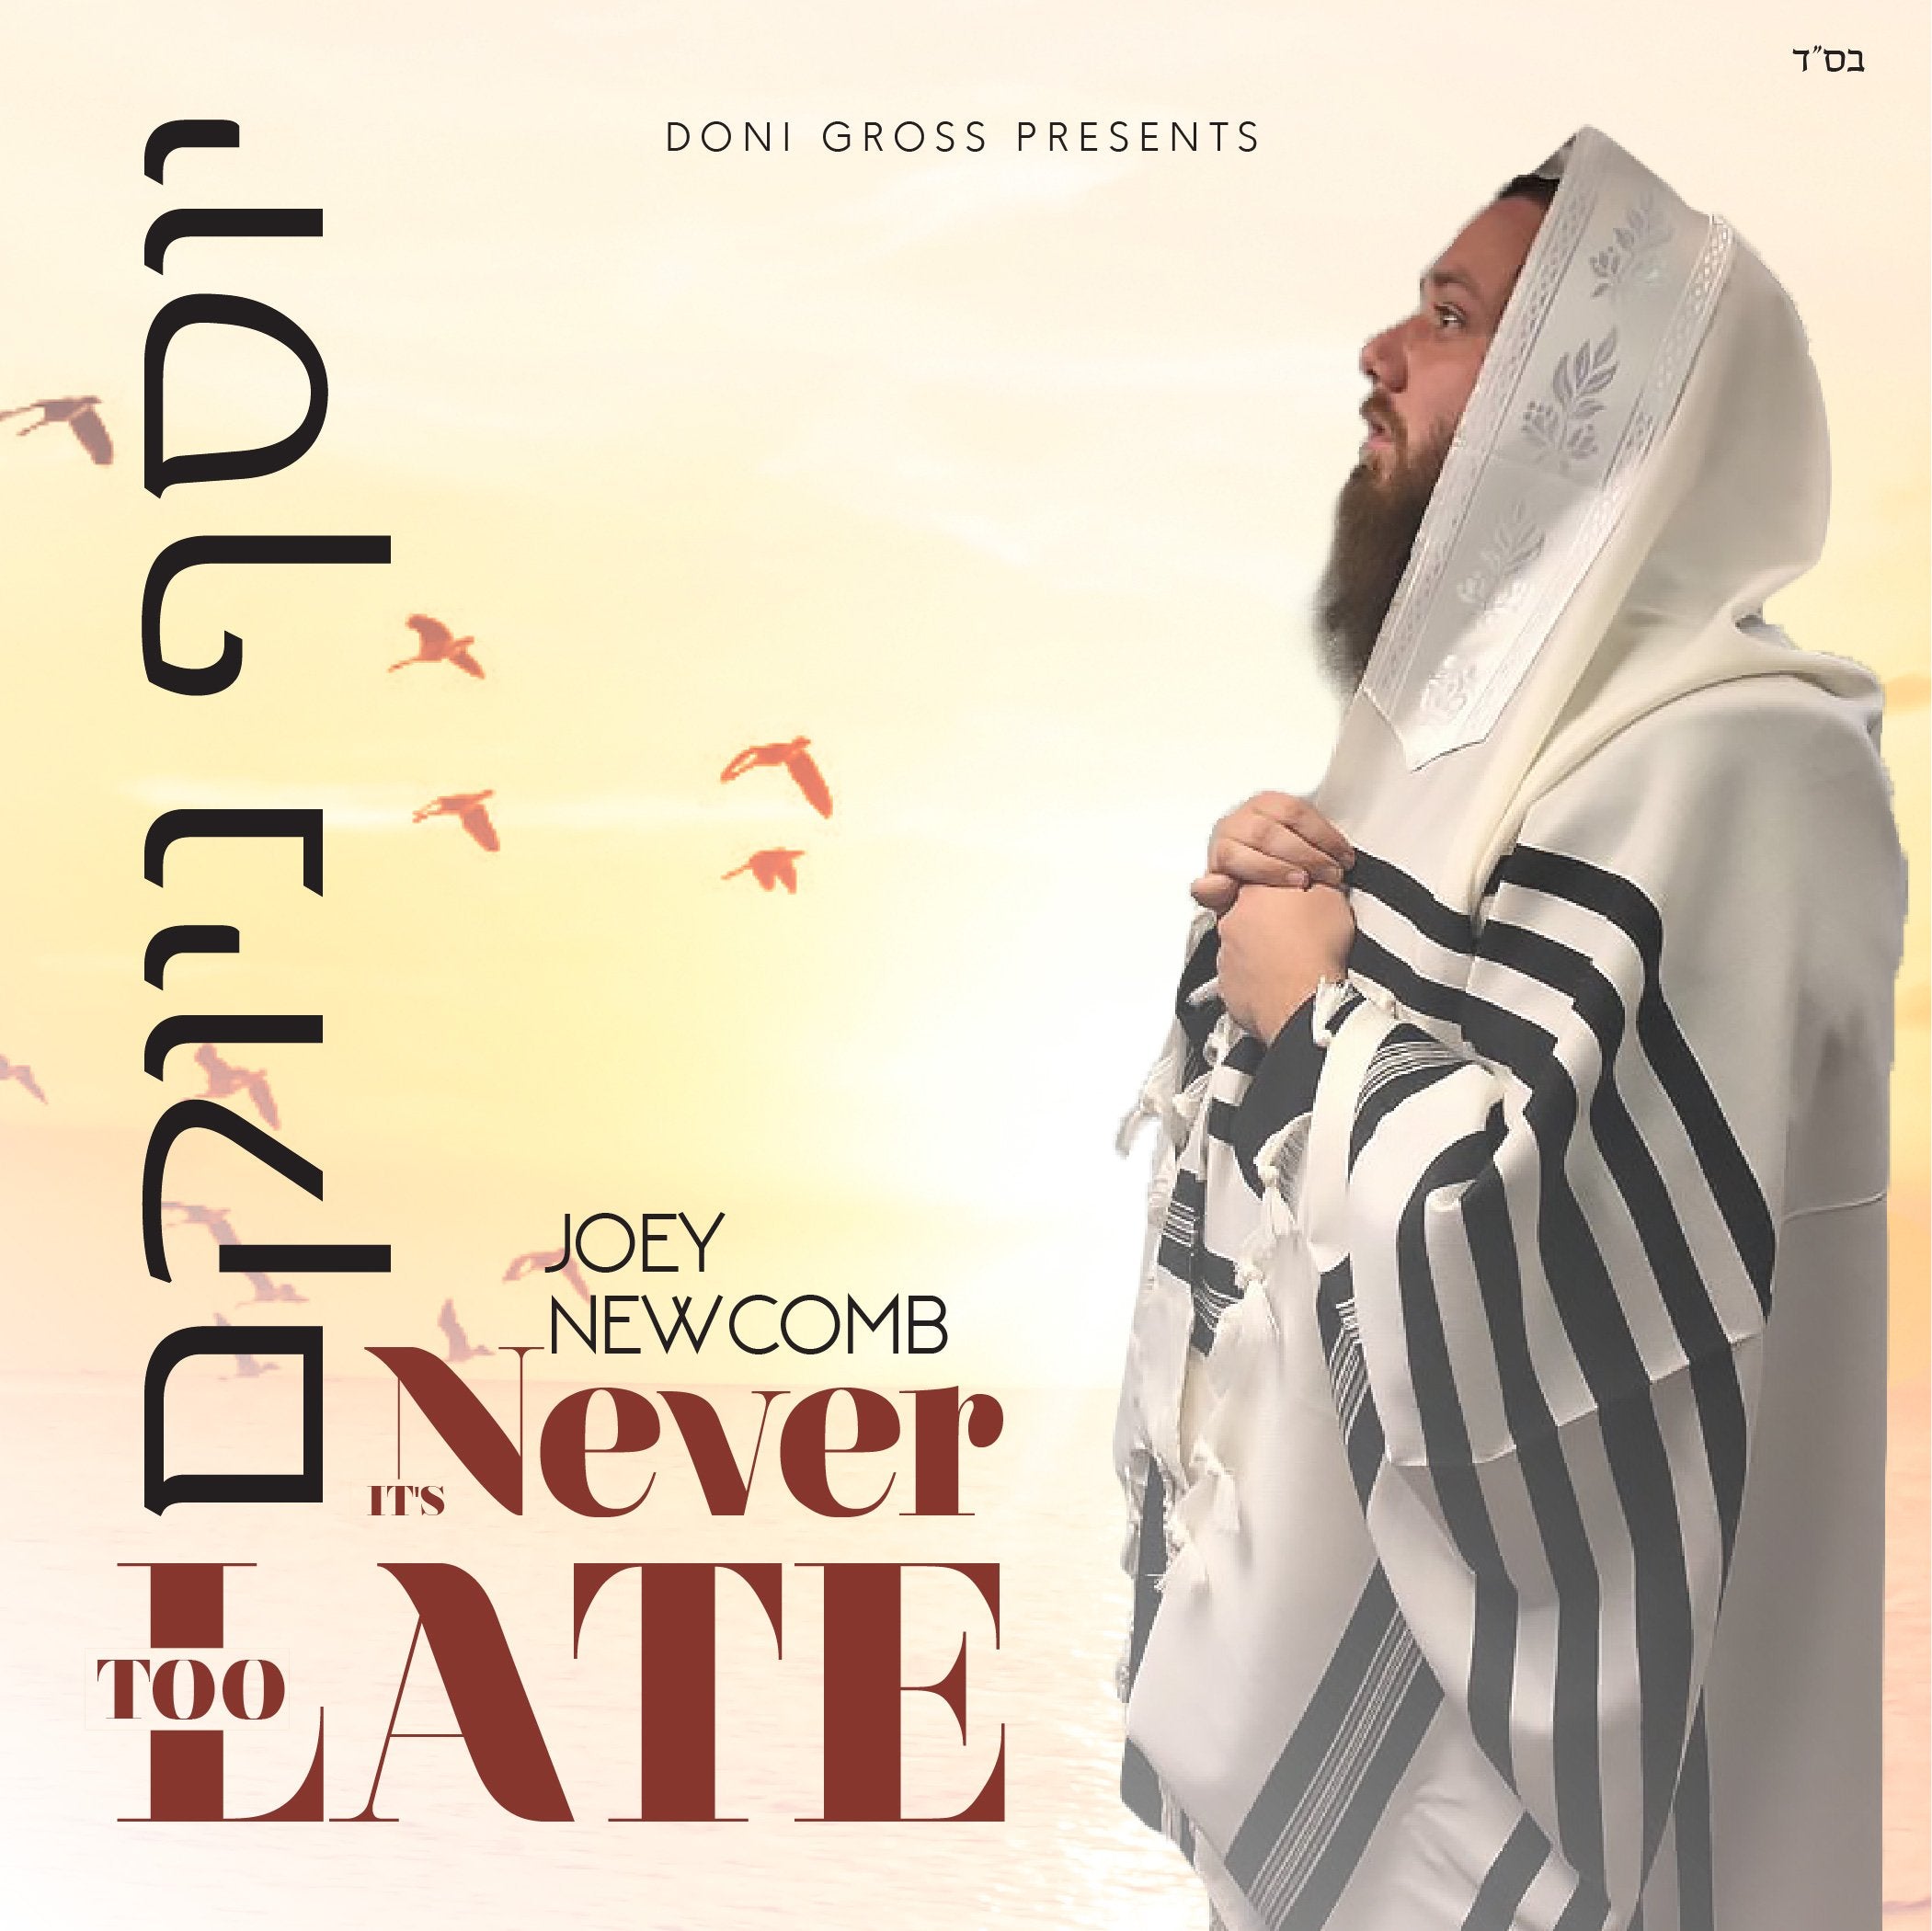 Joey Newcomb - It's Never Too Late (Single)